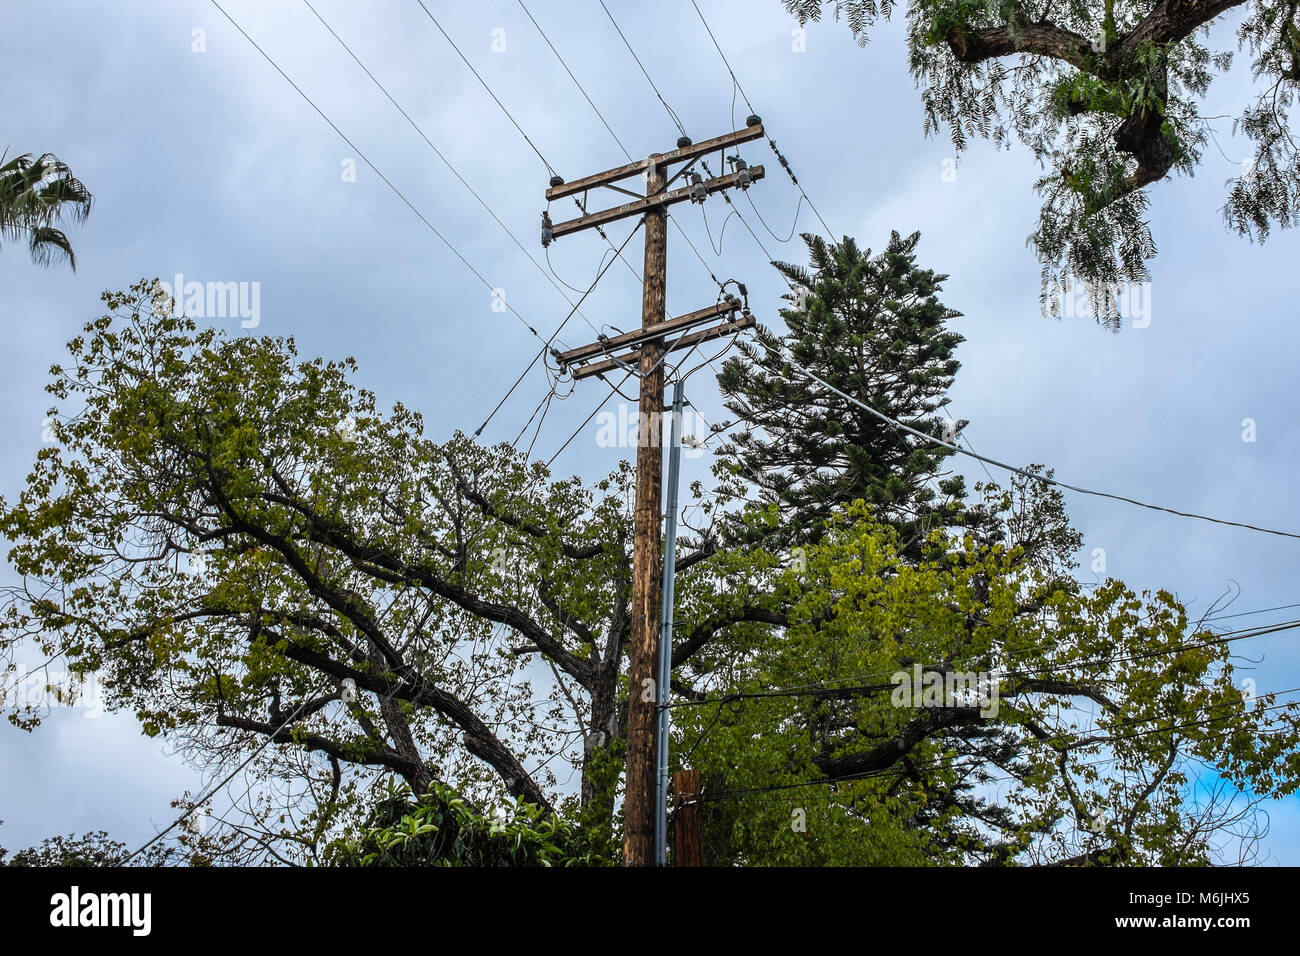 Overhead power and communication lines supported by wooden telegraph pole. Stock Photo